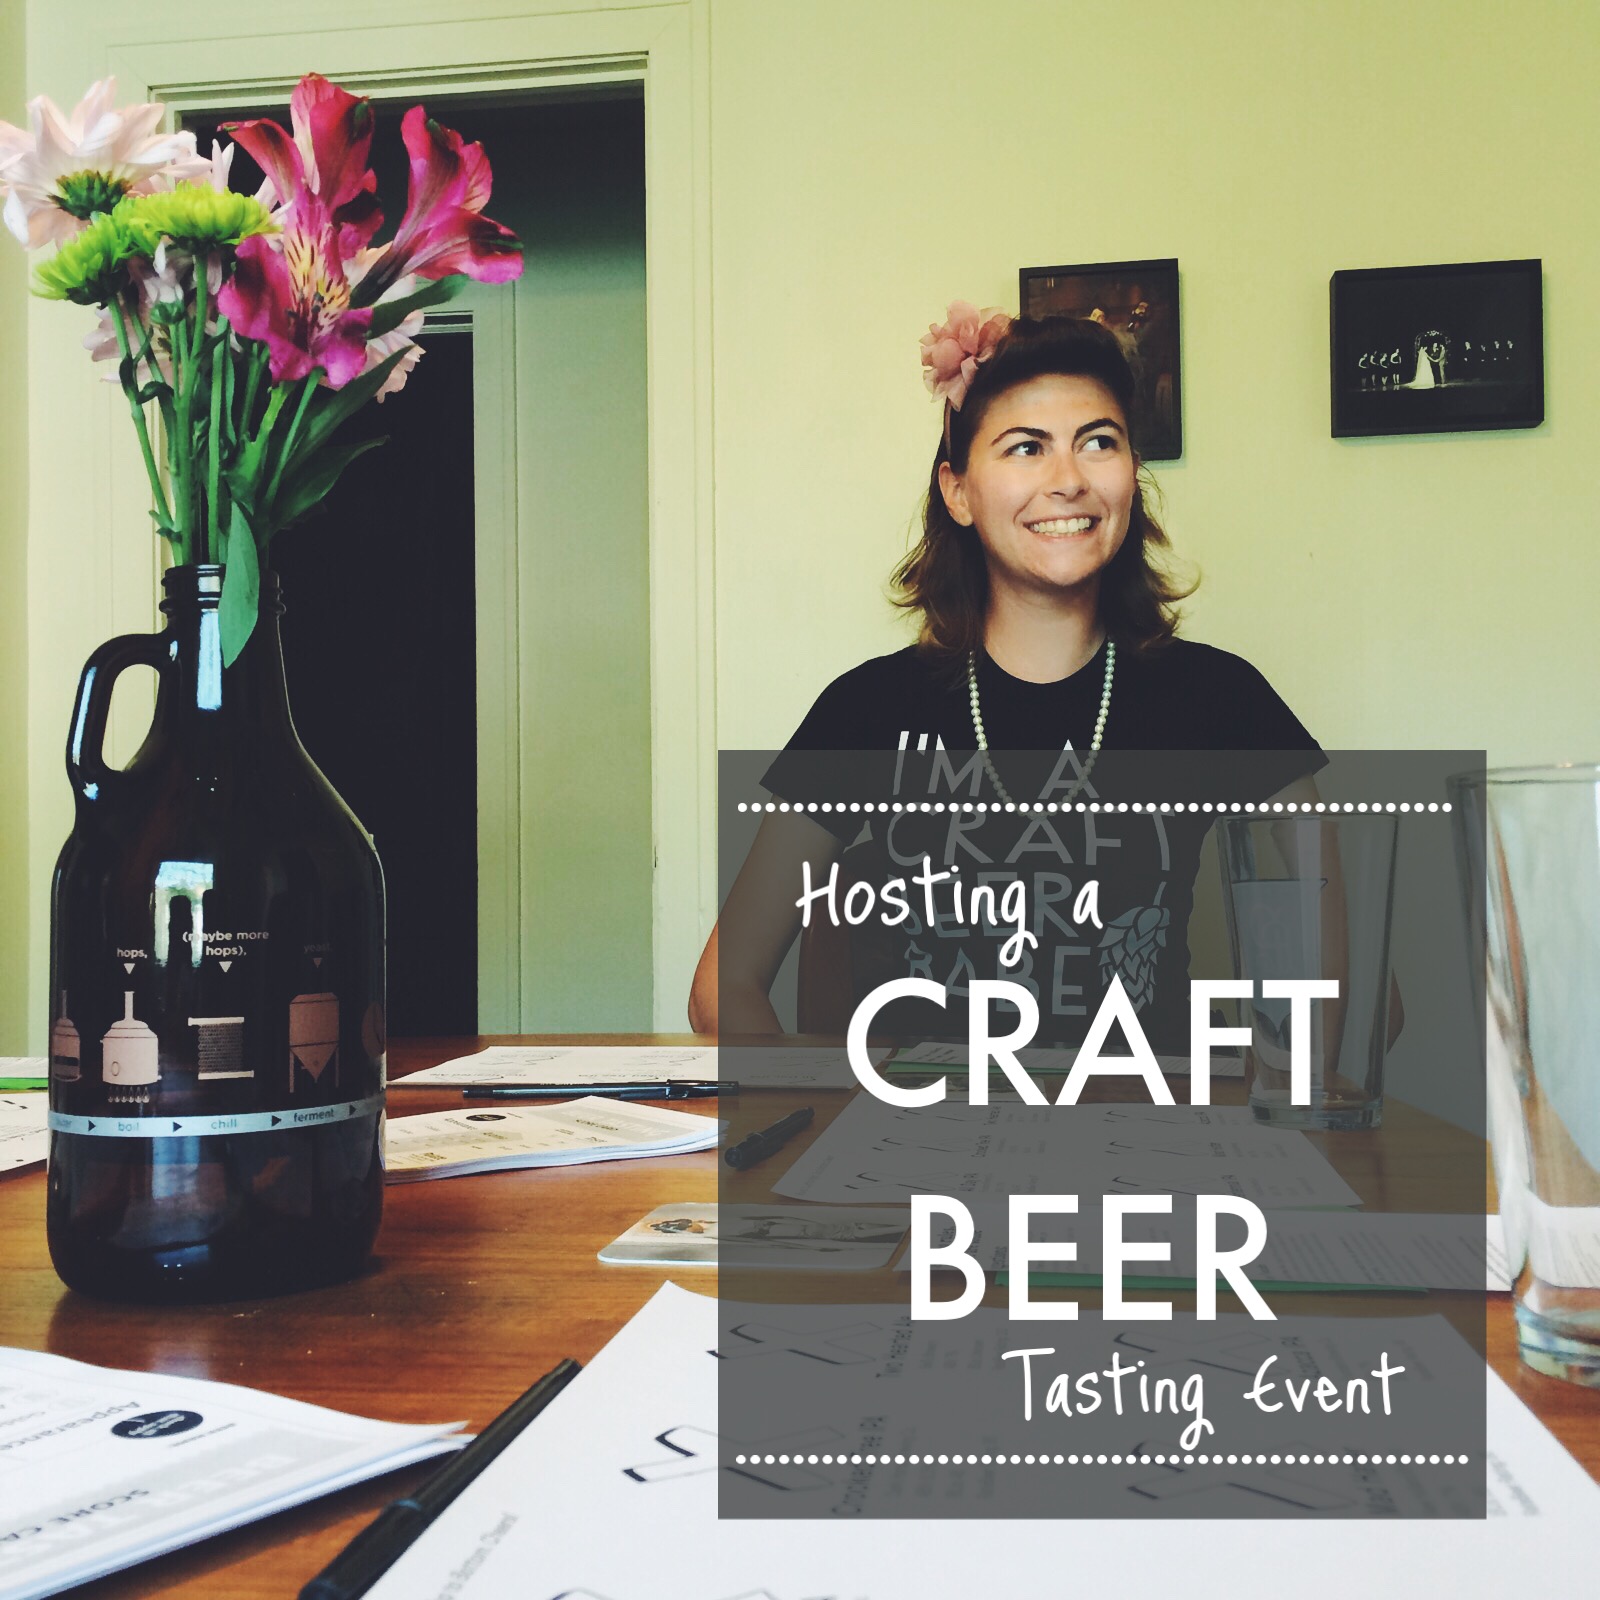 A picture of Amy from Polka Dots and Pints sitting a table with beer tasting mats and a growler vase full of flowers with the text "Hosting a Craft Beer Tasting Event."